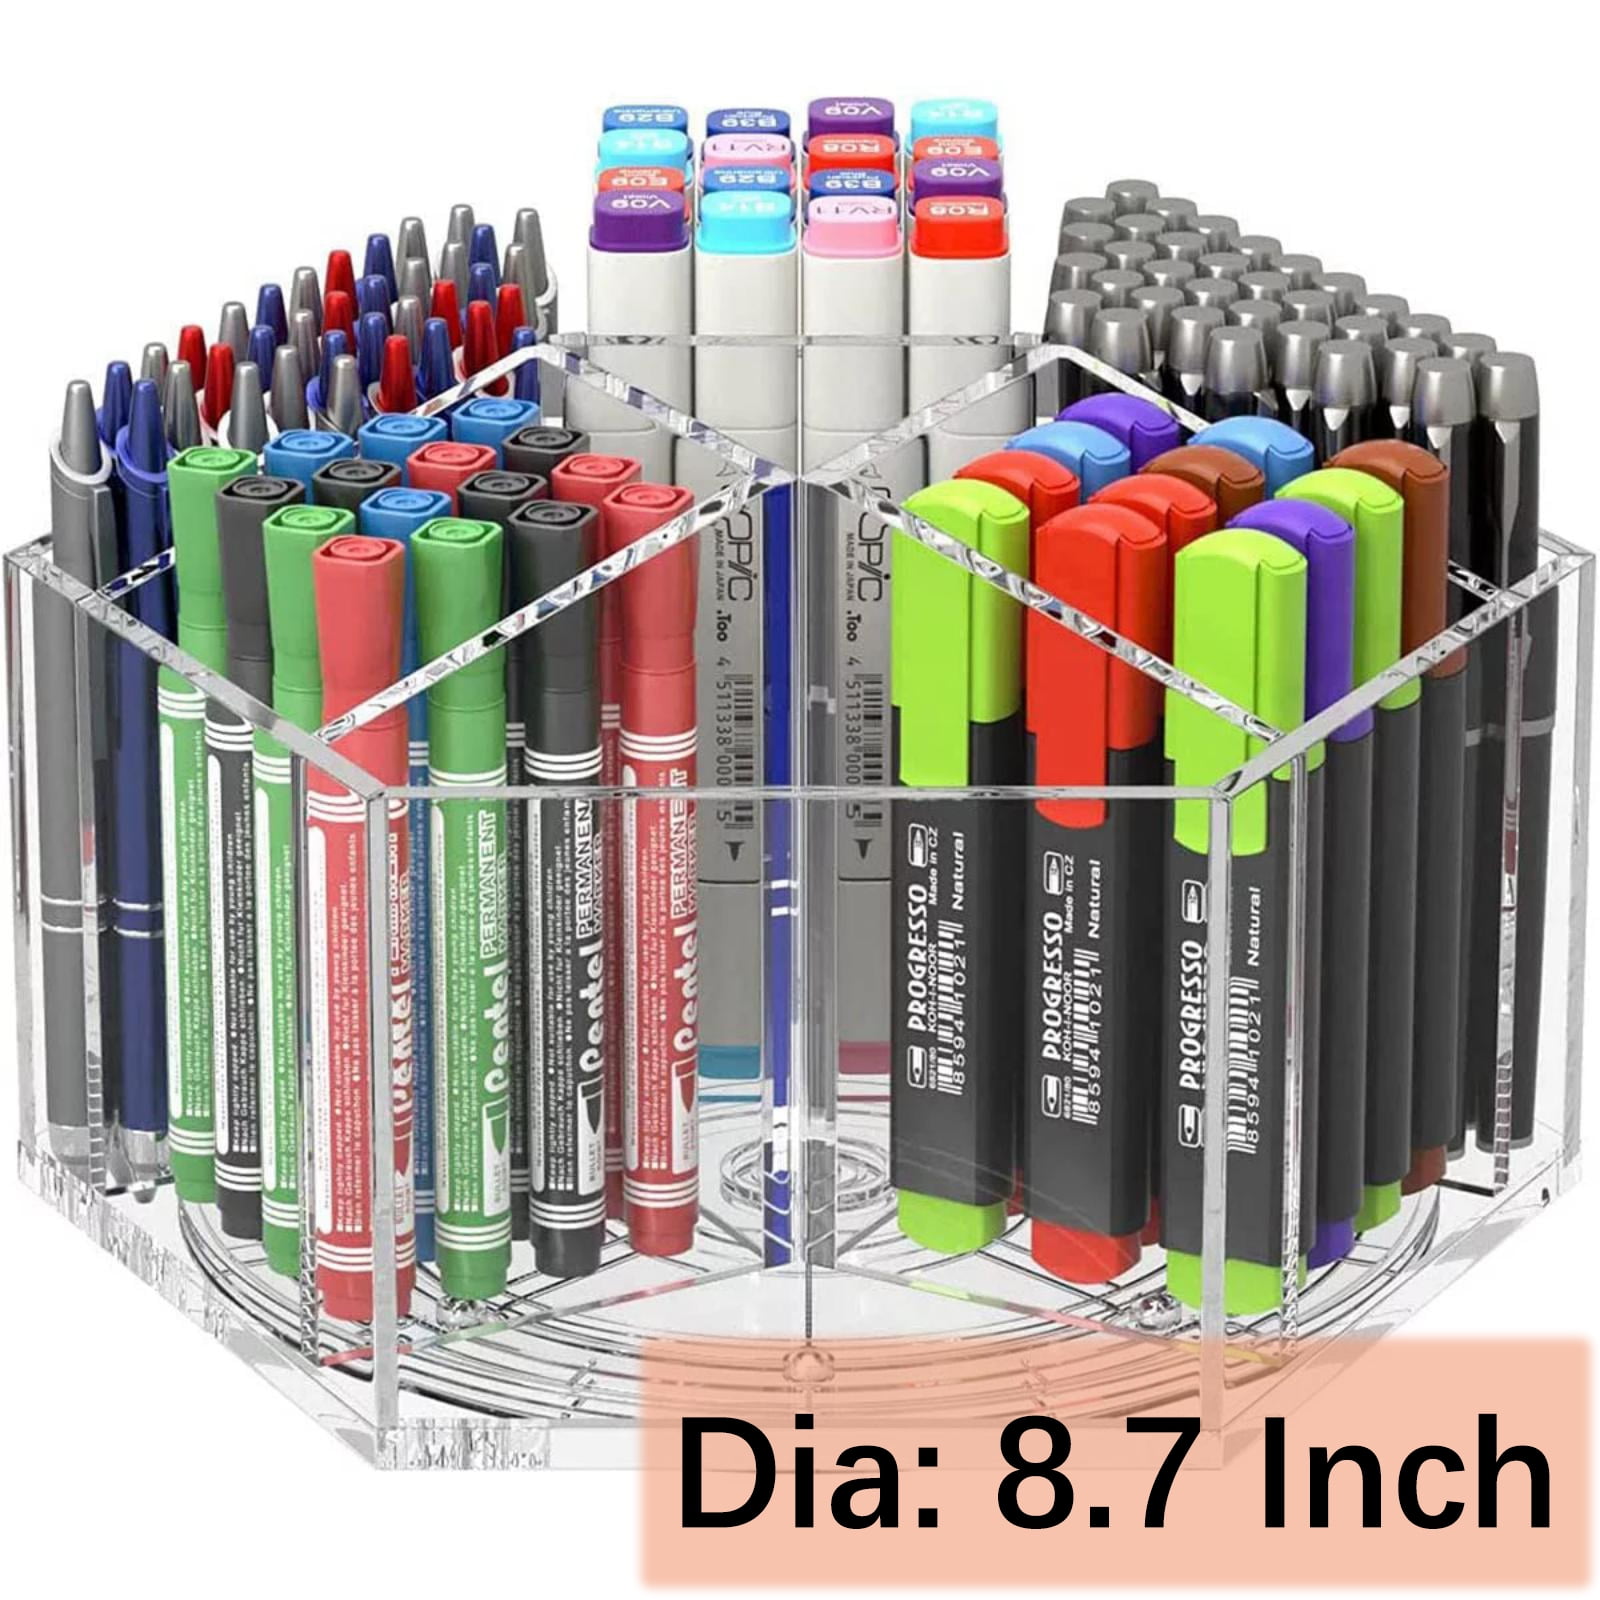 Outus 96 Hole Pencil Brush Holder Acrylic Pen Holder Desk Stand Organizer  for Pencils Paint Brushes